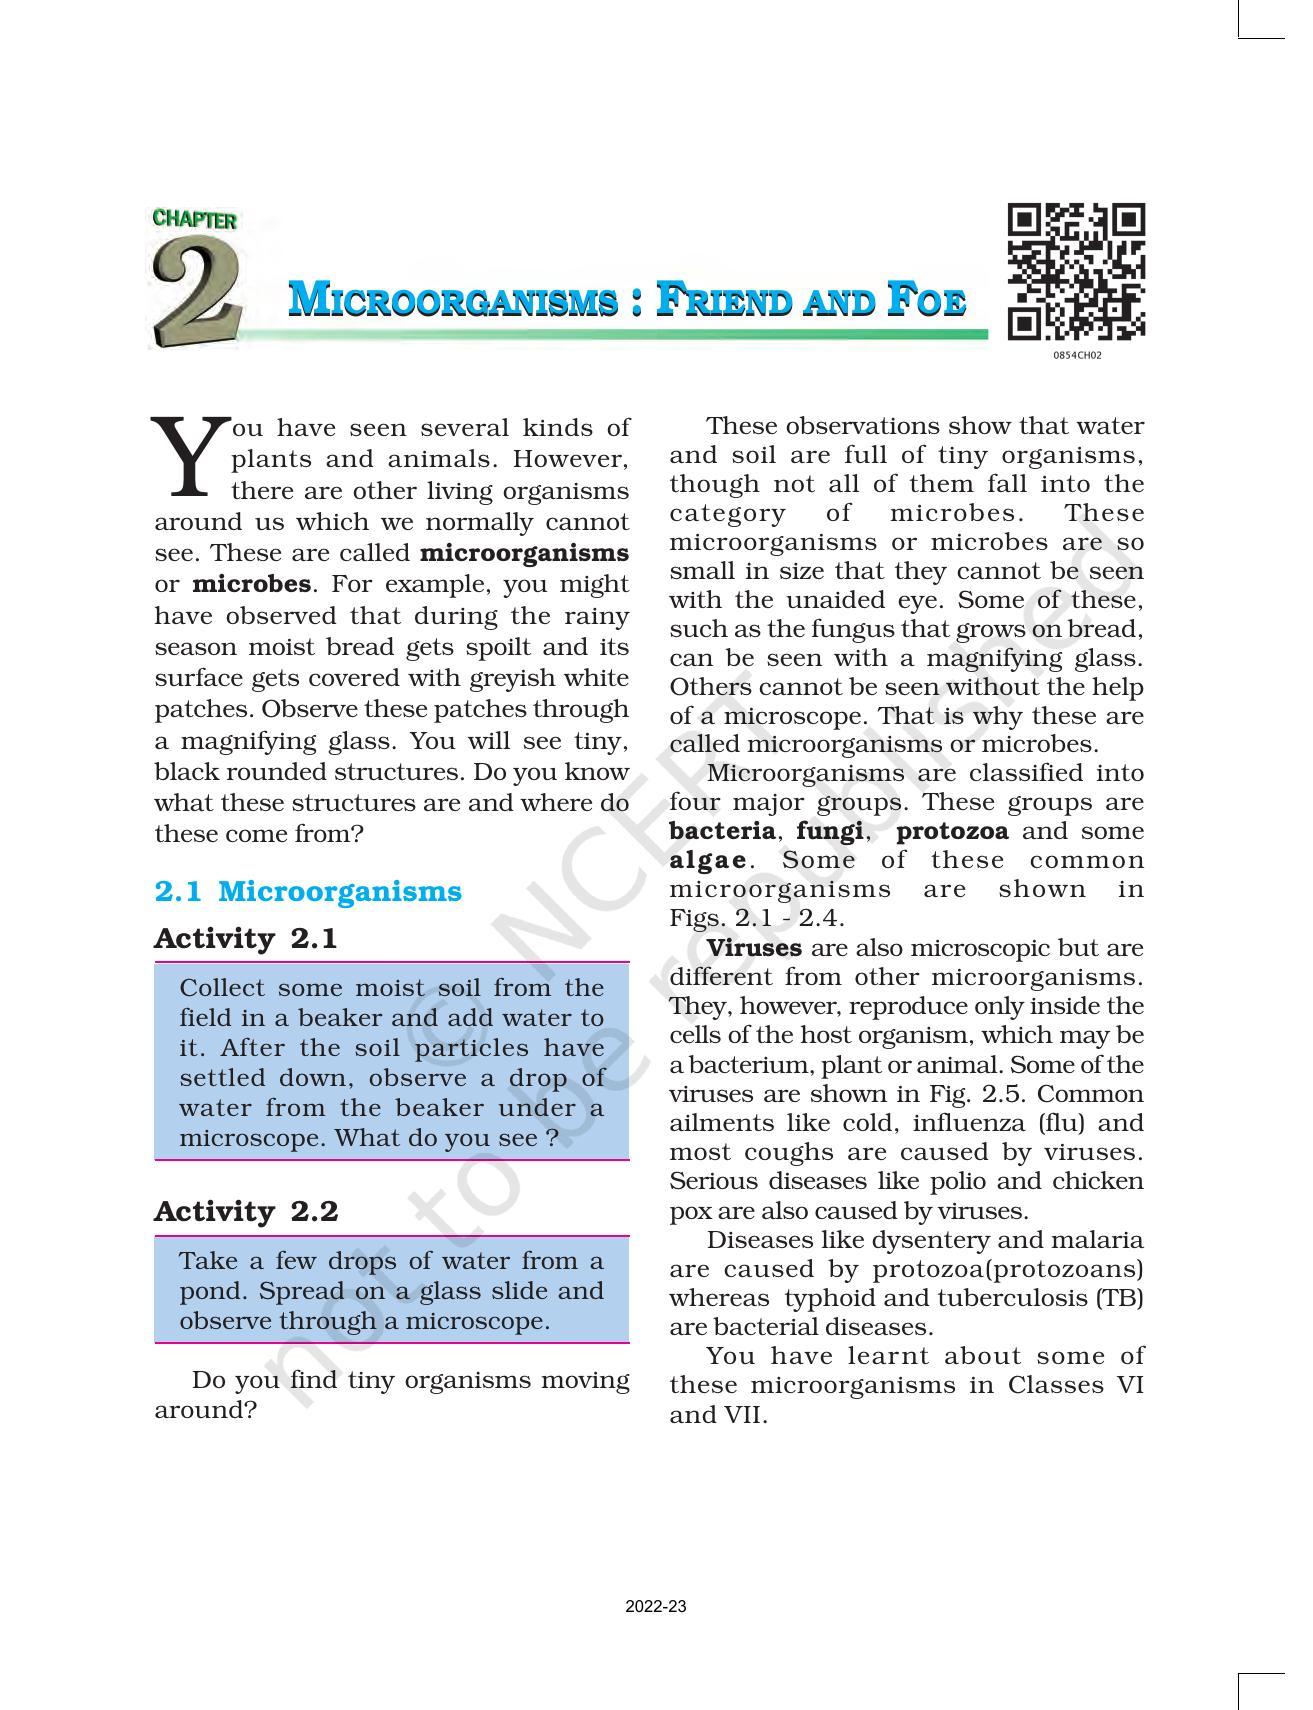 NCERT Book for Class 8 Science Chapter 2 Microorganisms: Friend and Foe - Page 1